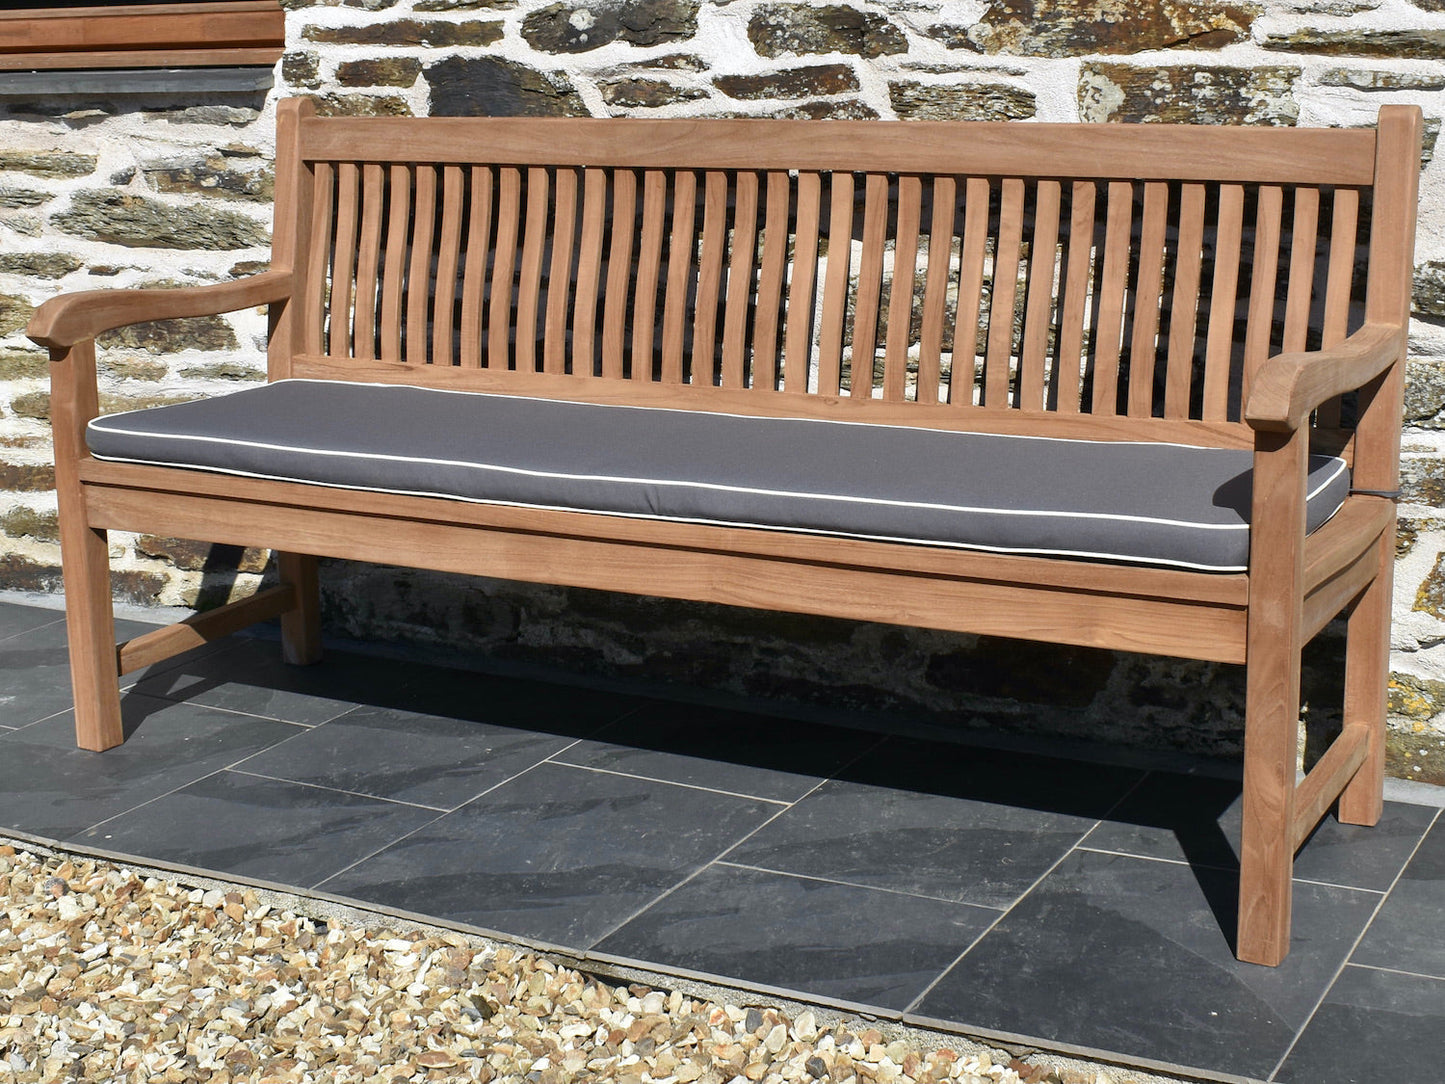 Luxury grey colour outdoor cushion for 4 seater / 180cm garden bench with contrast white piping